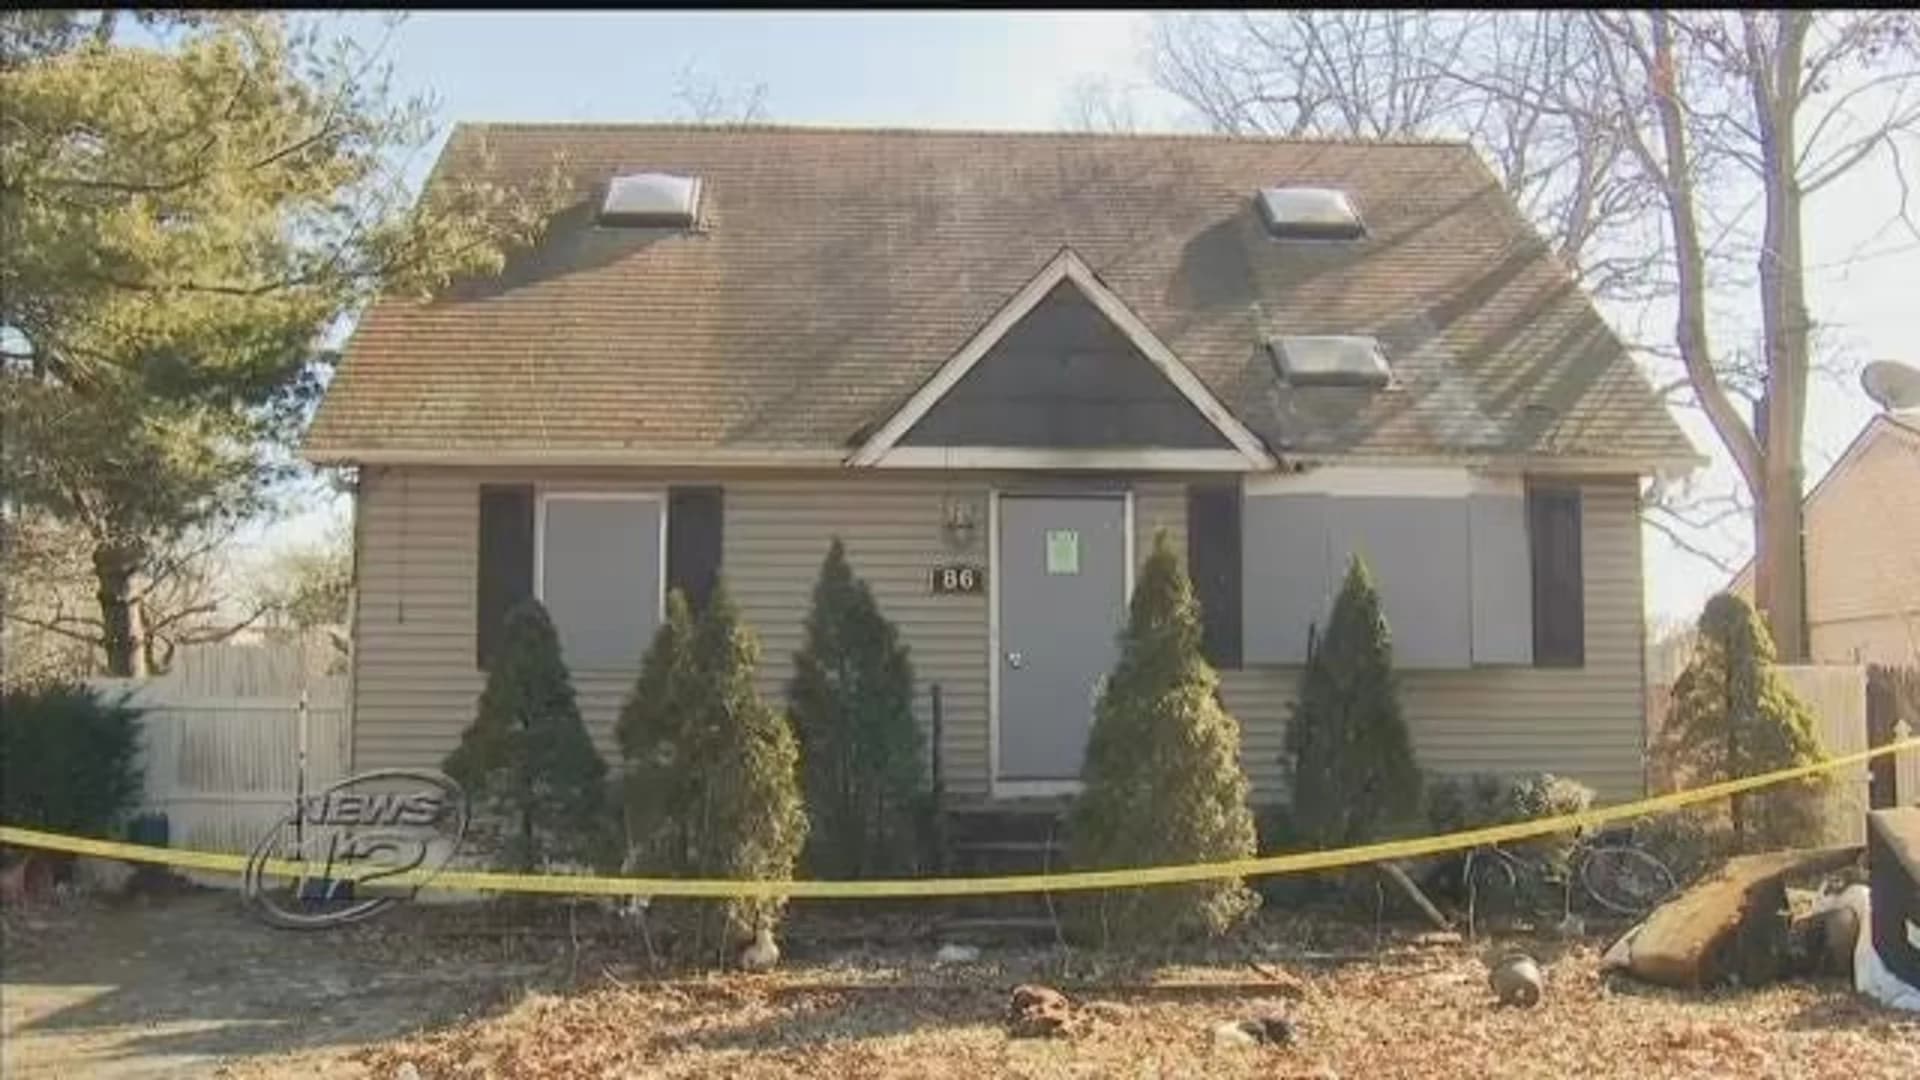 Authorities: Electrical fire in Patchogue home kills 2 women